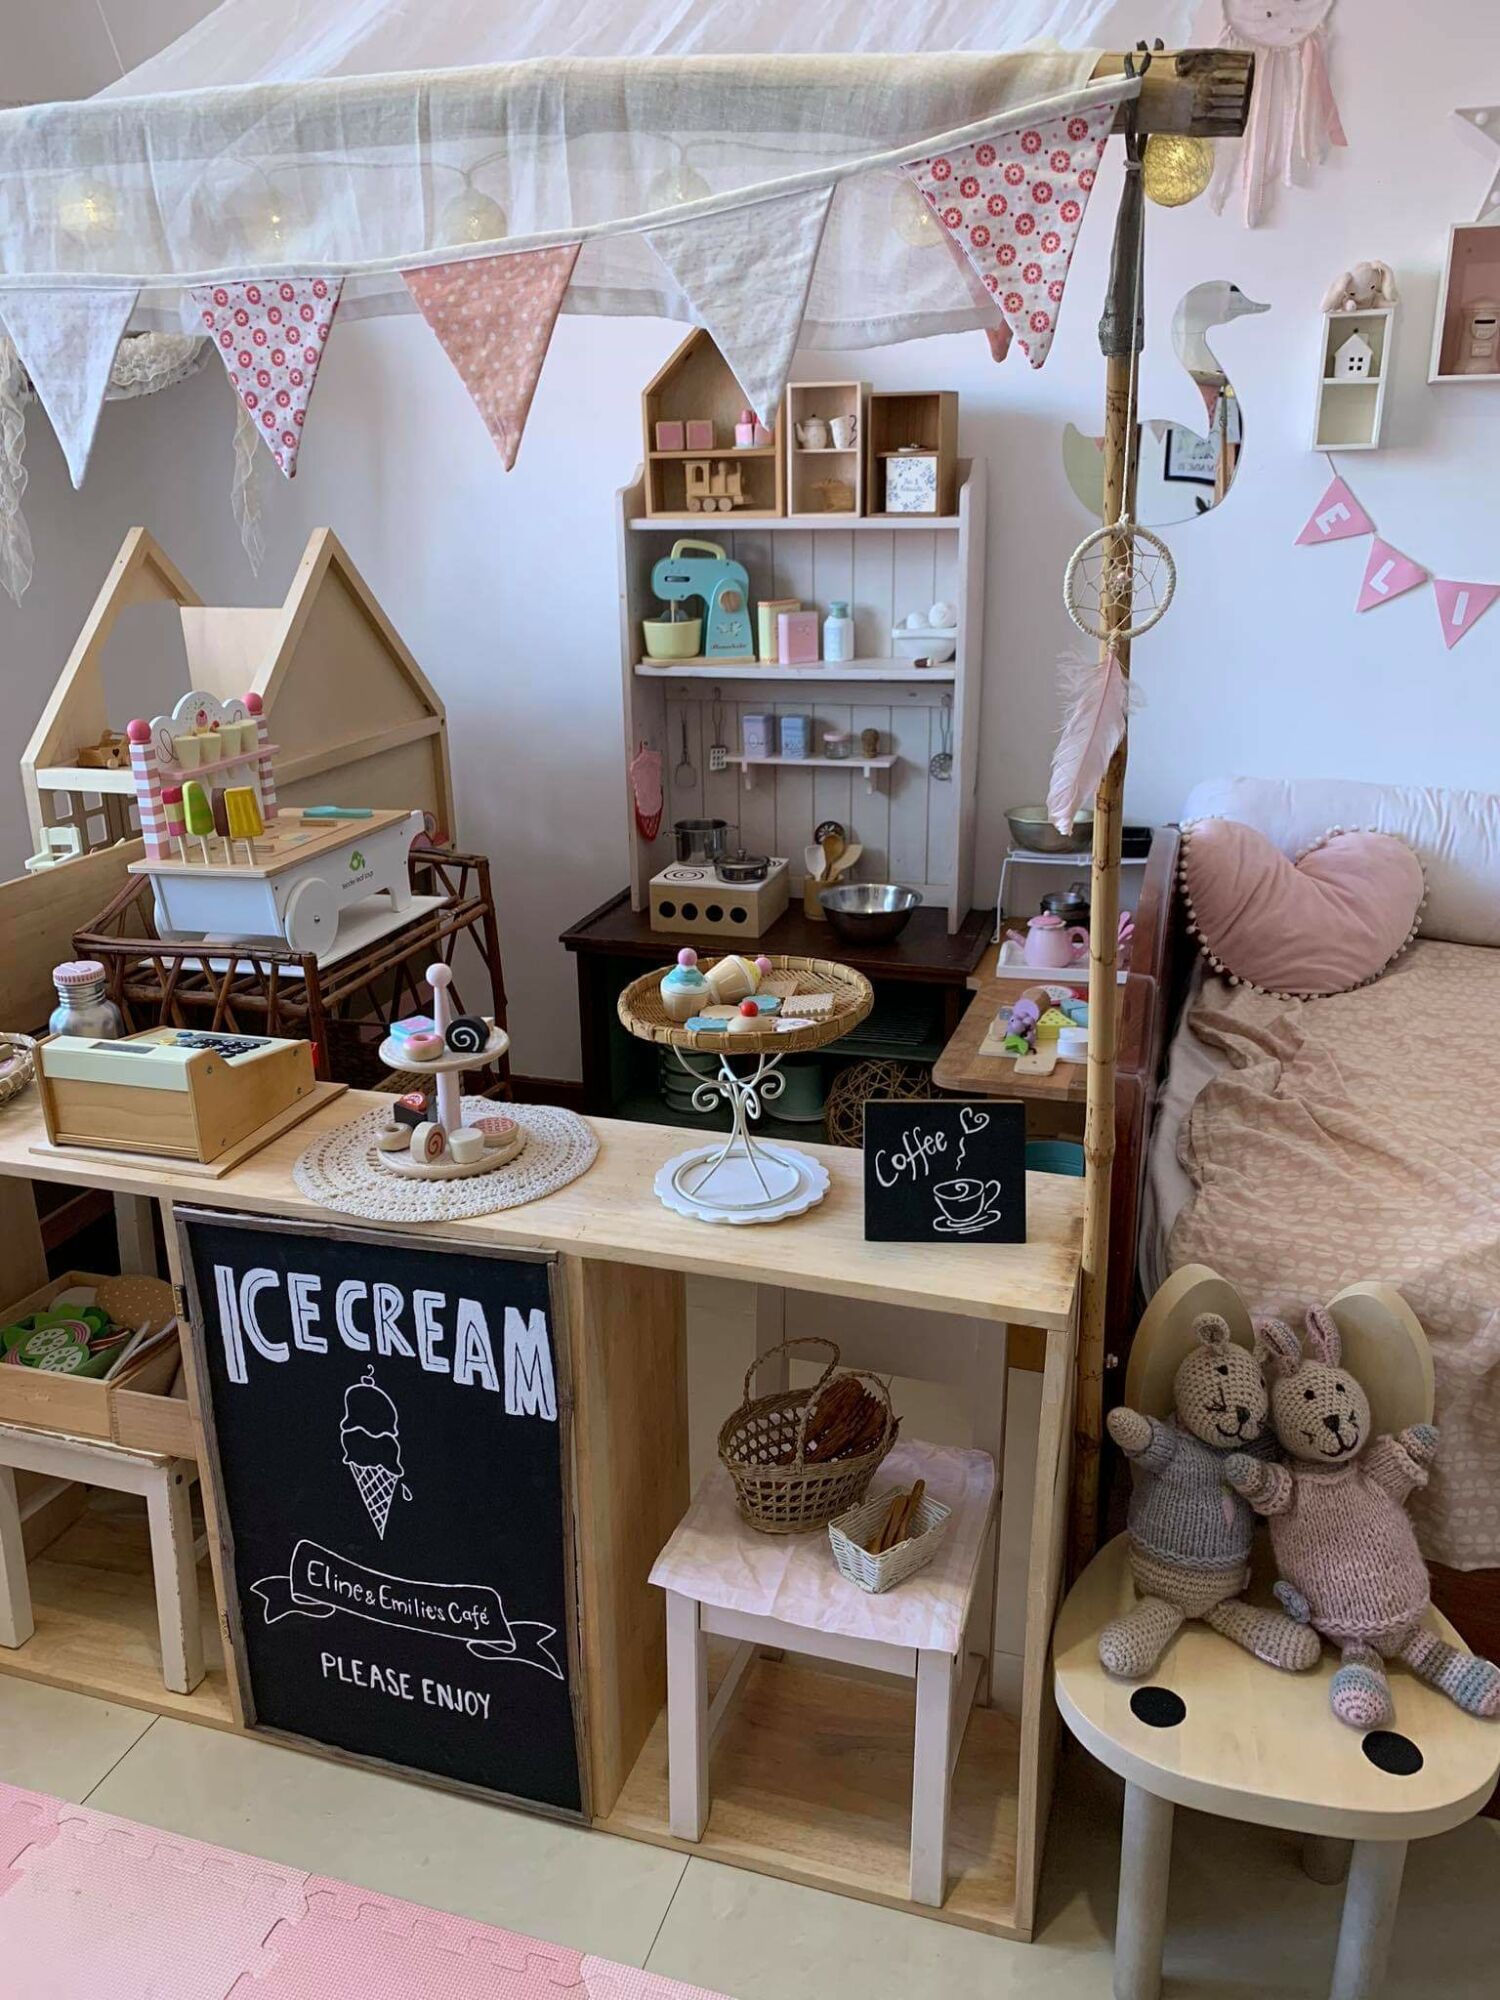 Cute handmade ice cream shop in a room, made by the mother